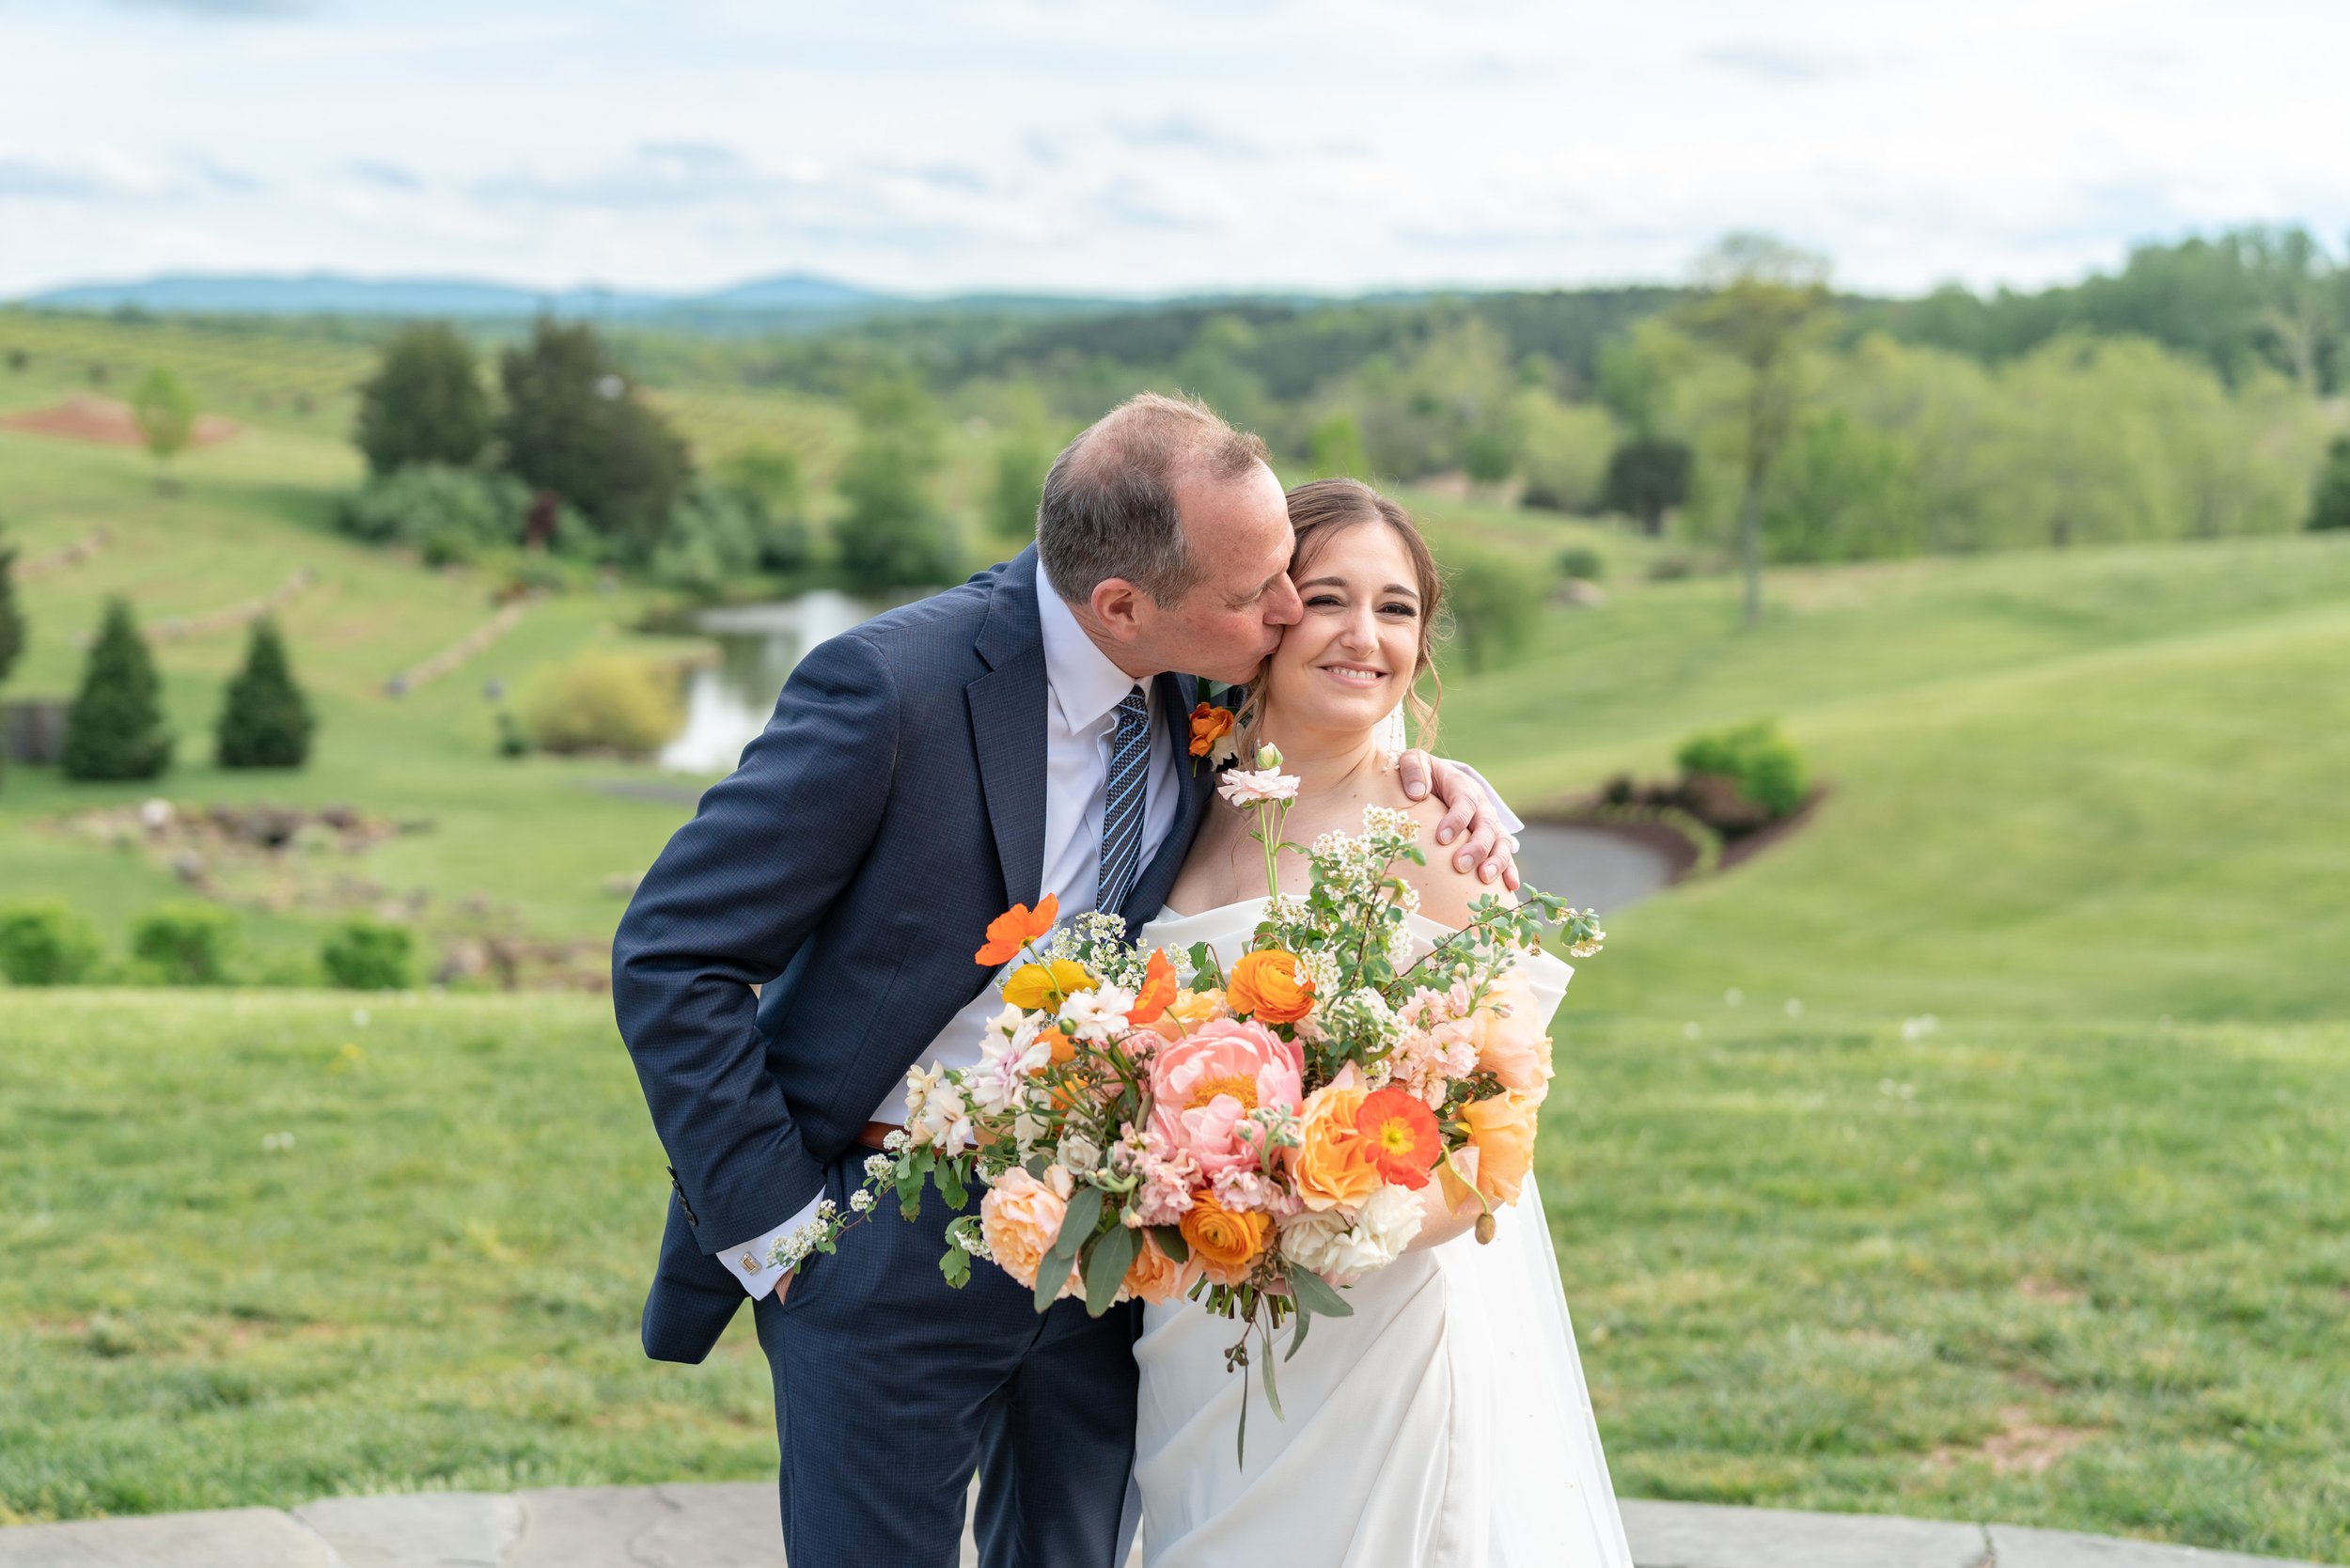 Bride's dad kisses her on the cheek with hillside views behind them